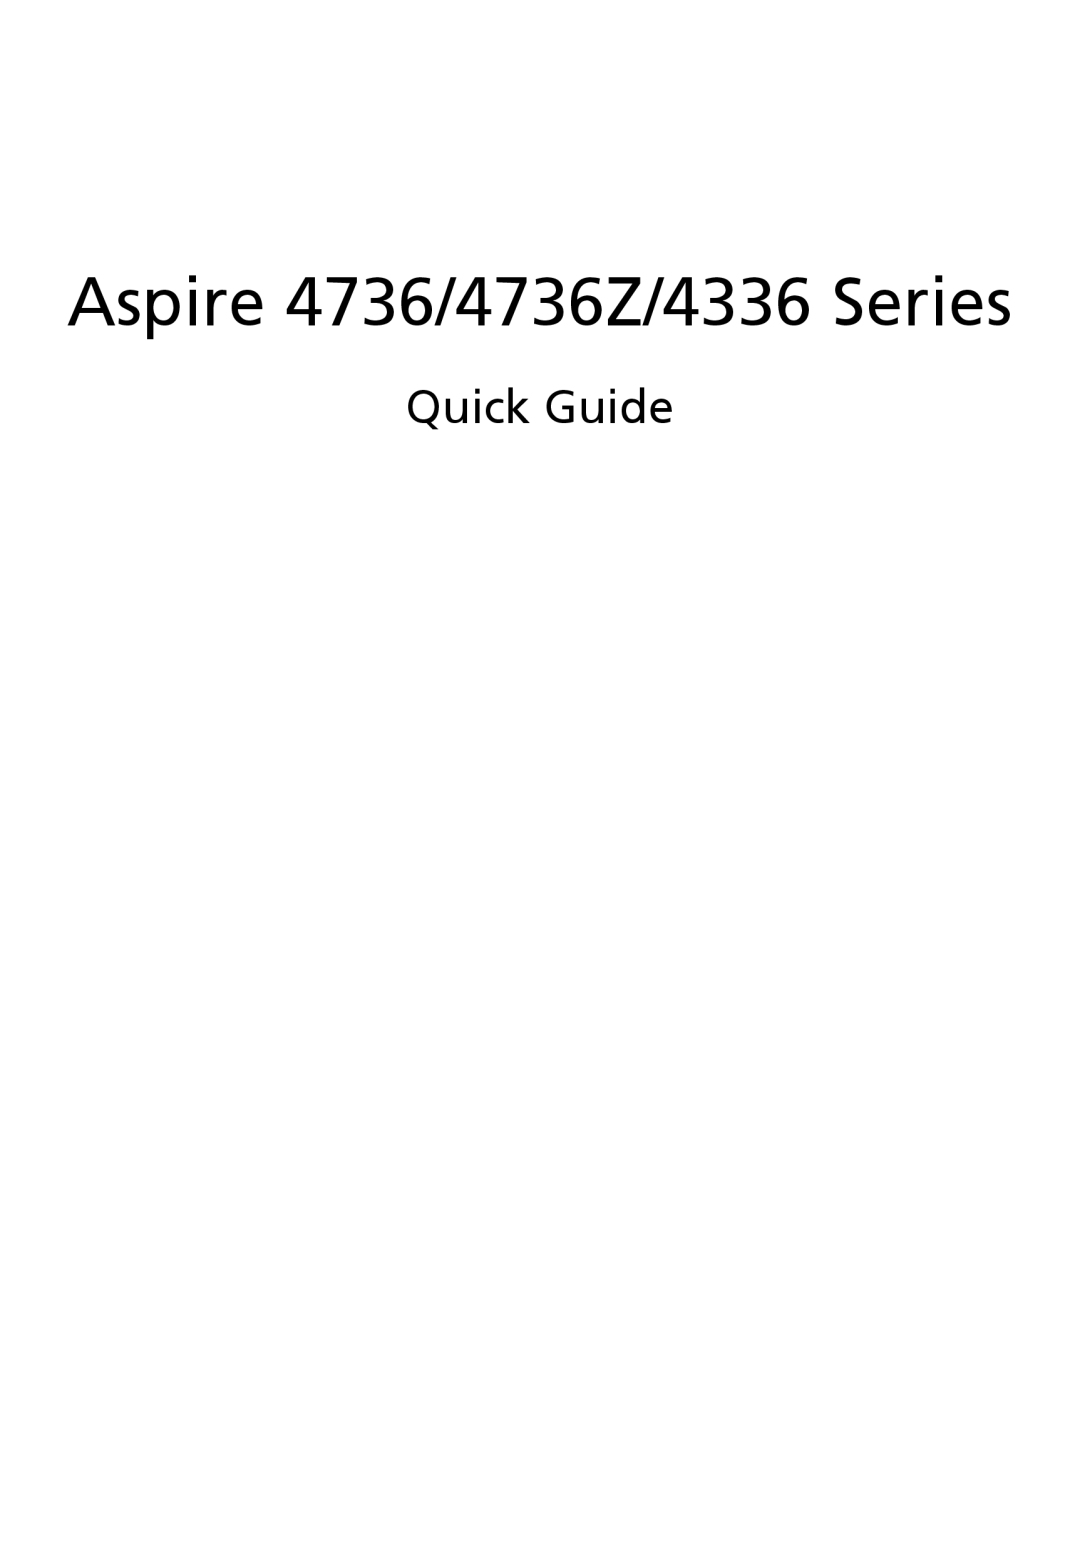 Acer 4736Z Series, 4736 Series manual Quick Guide, Aspire 4736/4736Z/4336 Series 